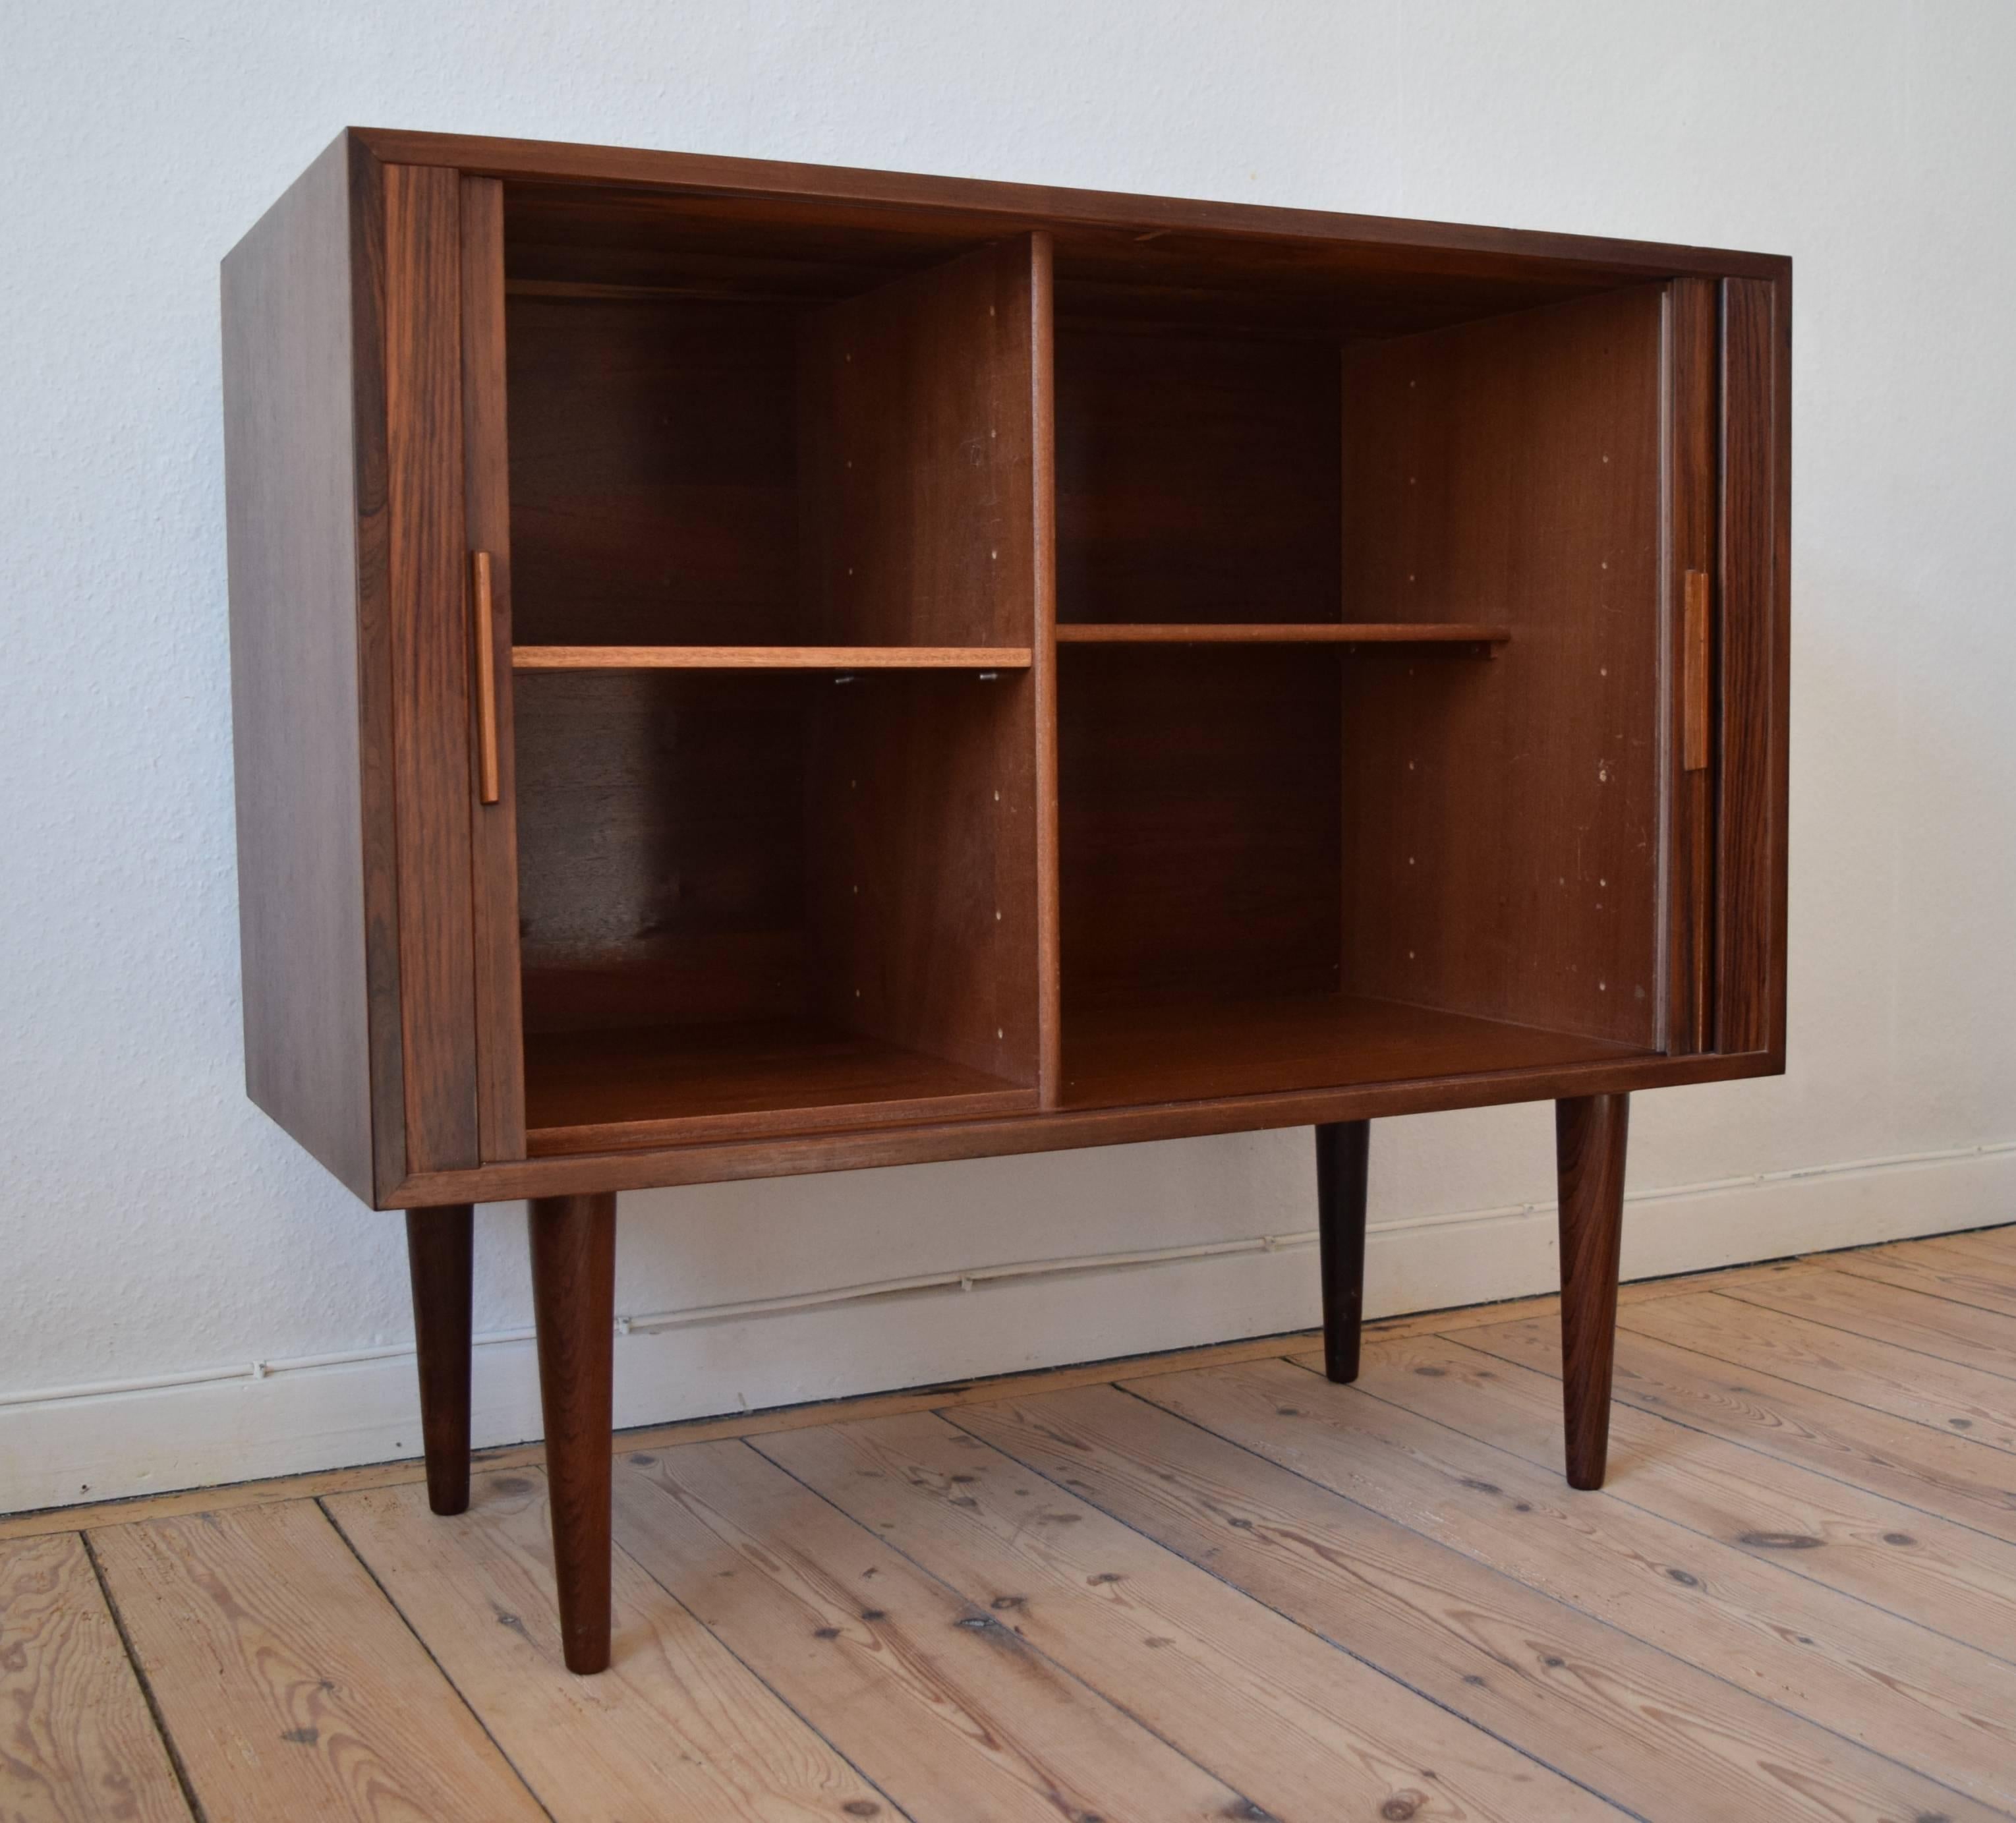 1960s Kai Kristiansen rosewood chest of drawers. Features tambour doors with solid rosewood pulls and interior shelves. The shelves can be rearranged to accommodate vertical shelf dividers which can be used for vinyl records etc, manufactured by